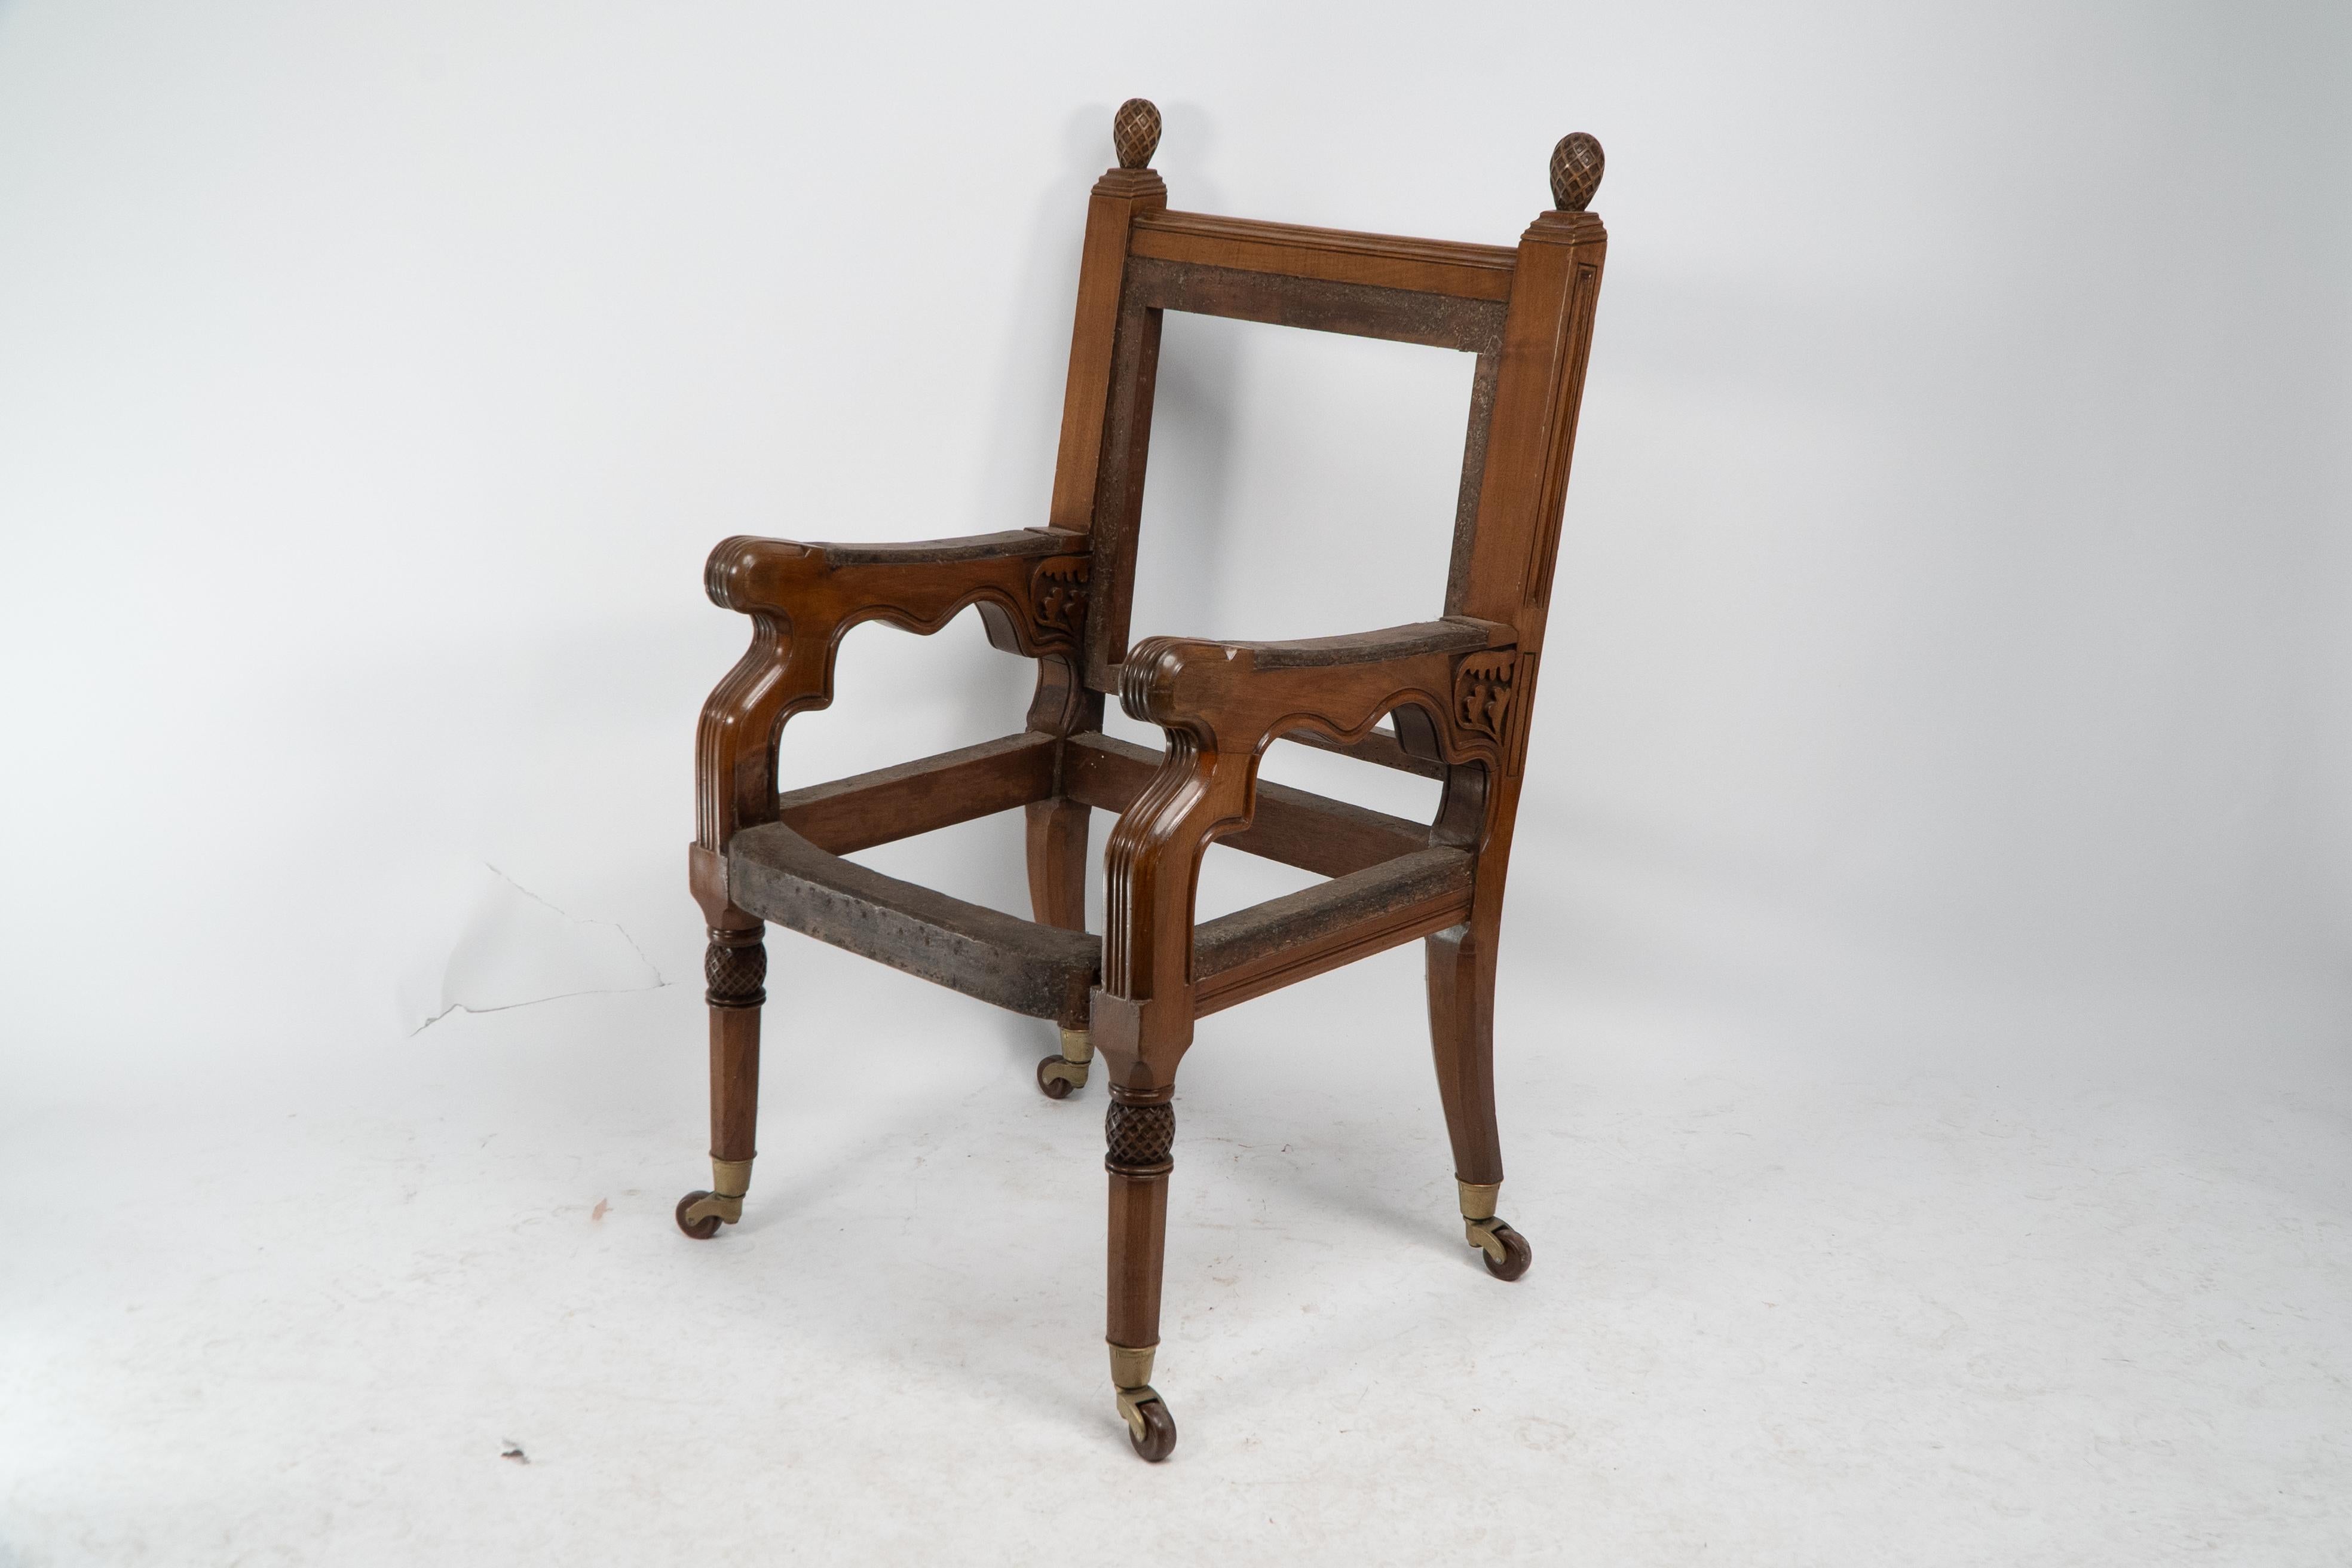 George Edmund Street. A Gothic Revival walnut armchair, designed for the Judges for The Royal Courts of Justice in Fleet St (London's High Court). With spiral carved finials and further spiral carving to the front legs. With a subtle flowing design